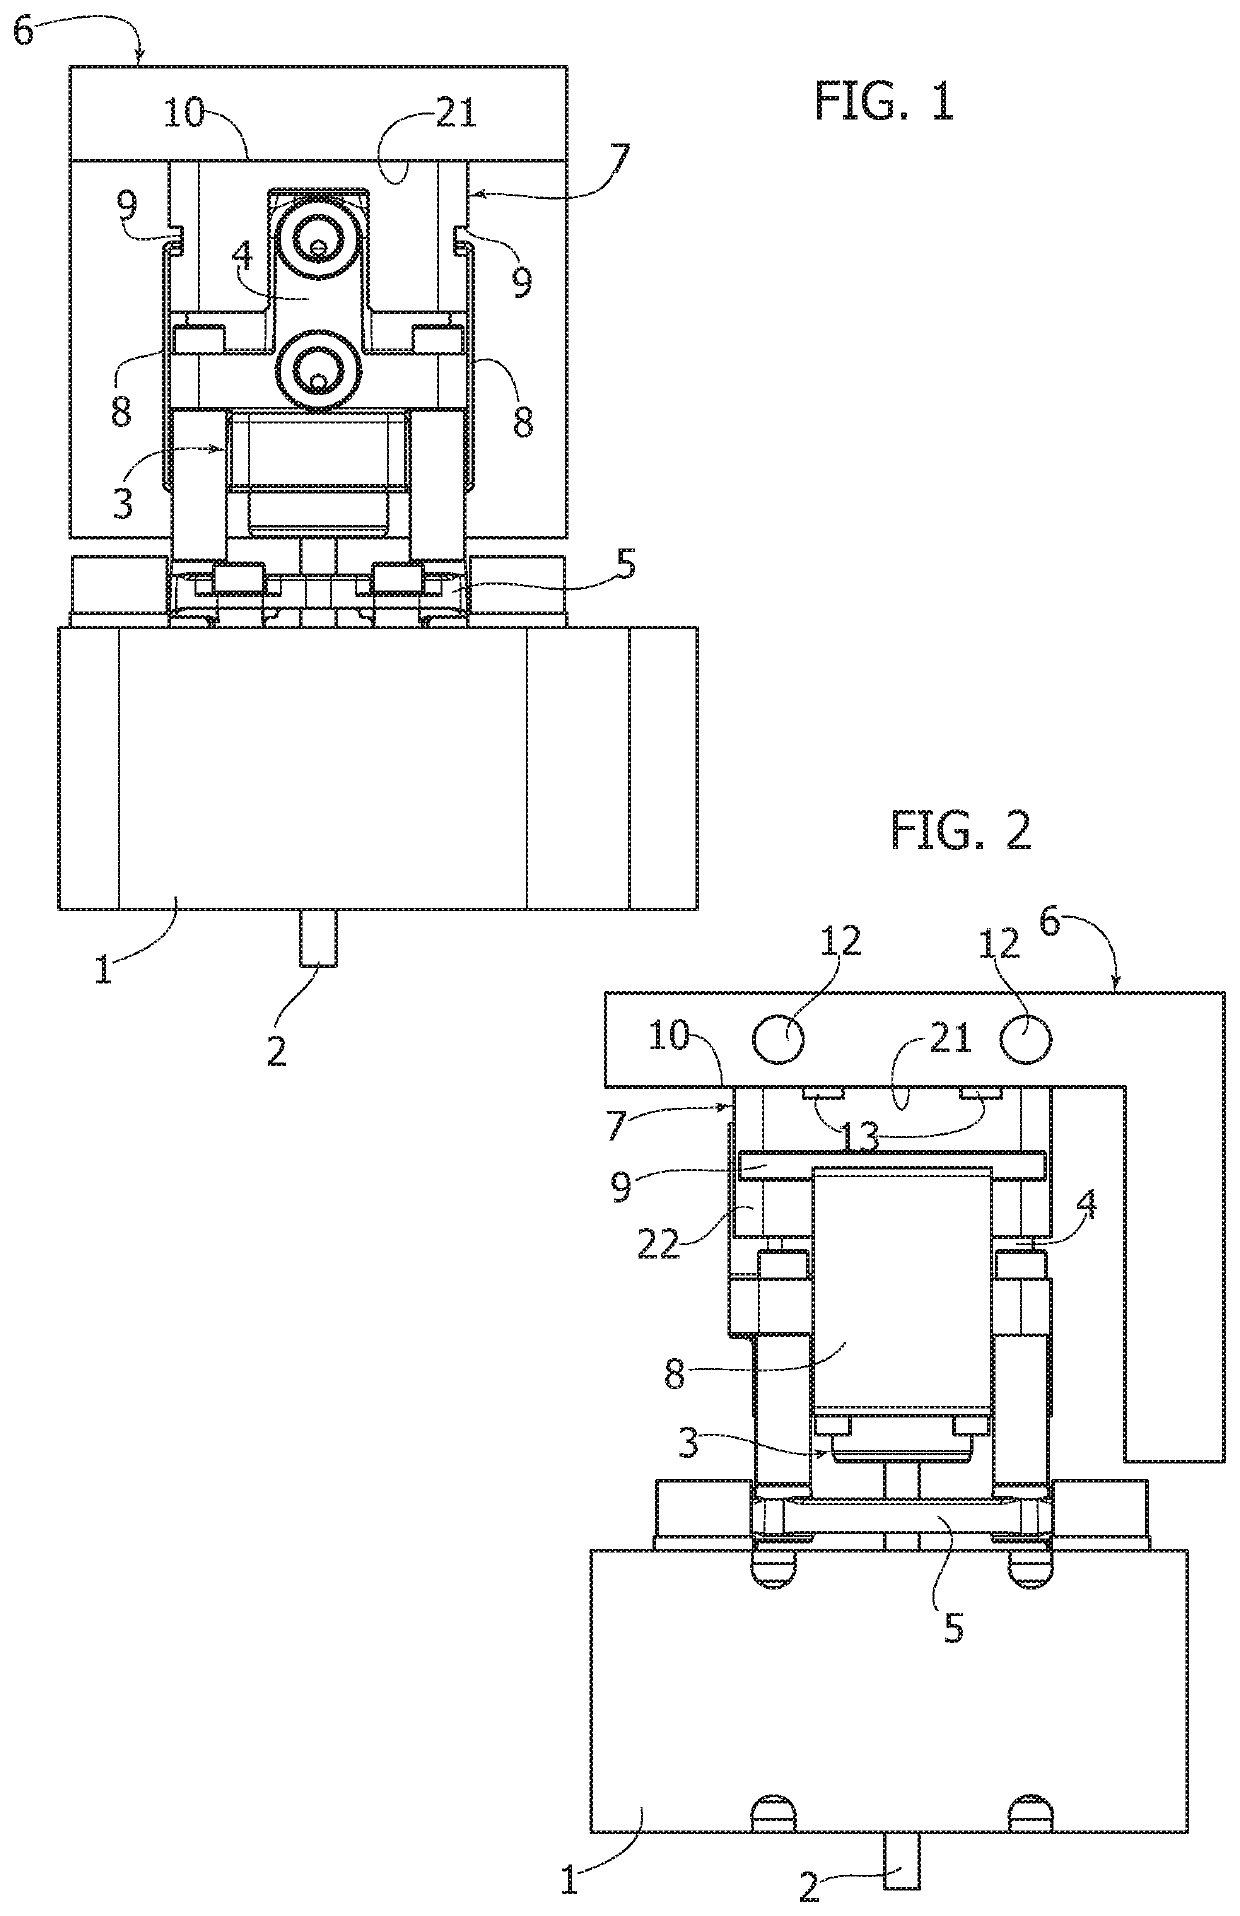 Apparatus for injection molding of plastic materials